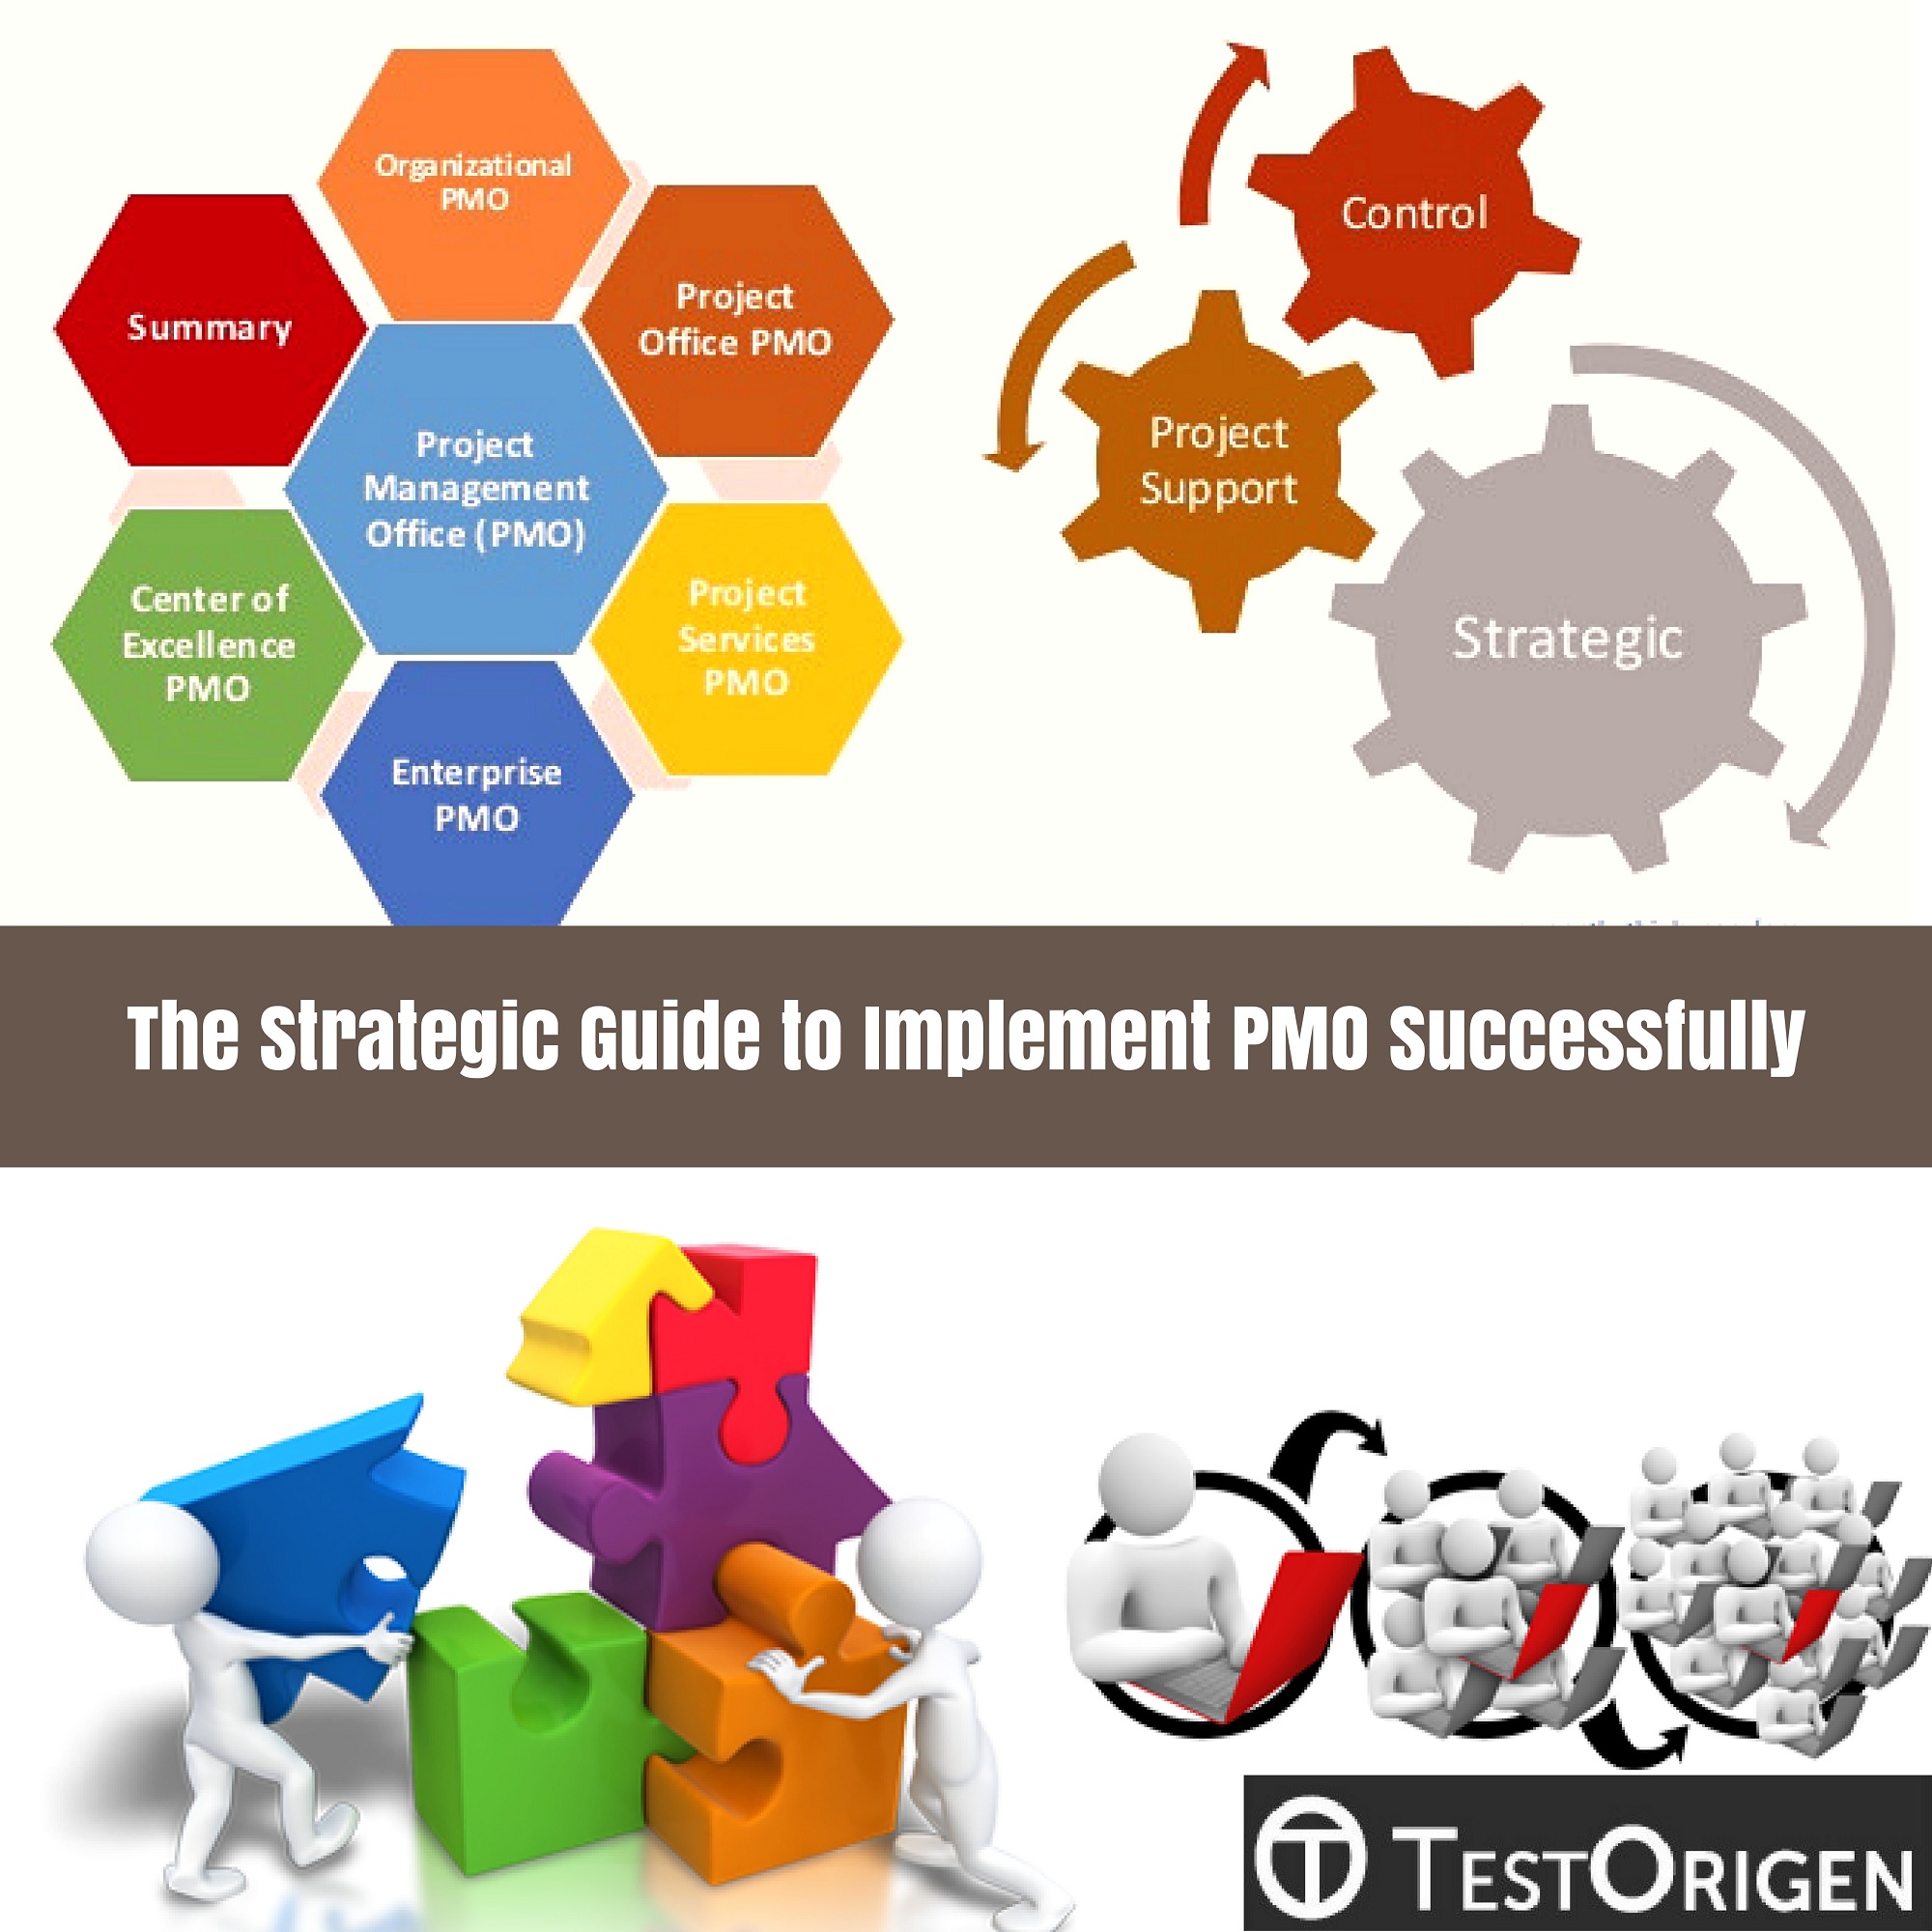 The Strategic Guide to Implement PMO Successfully